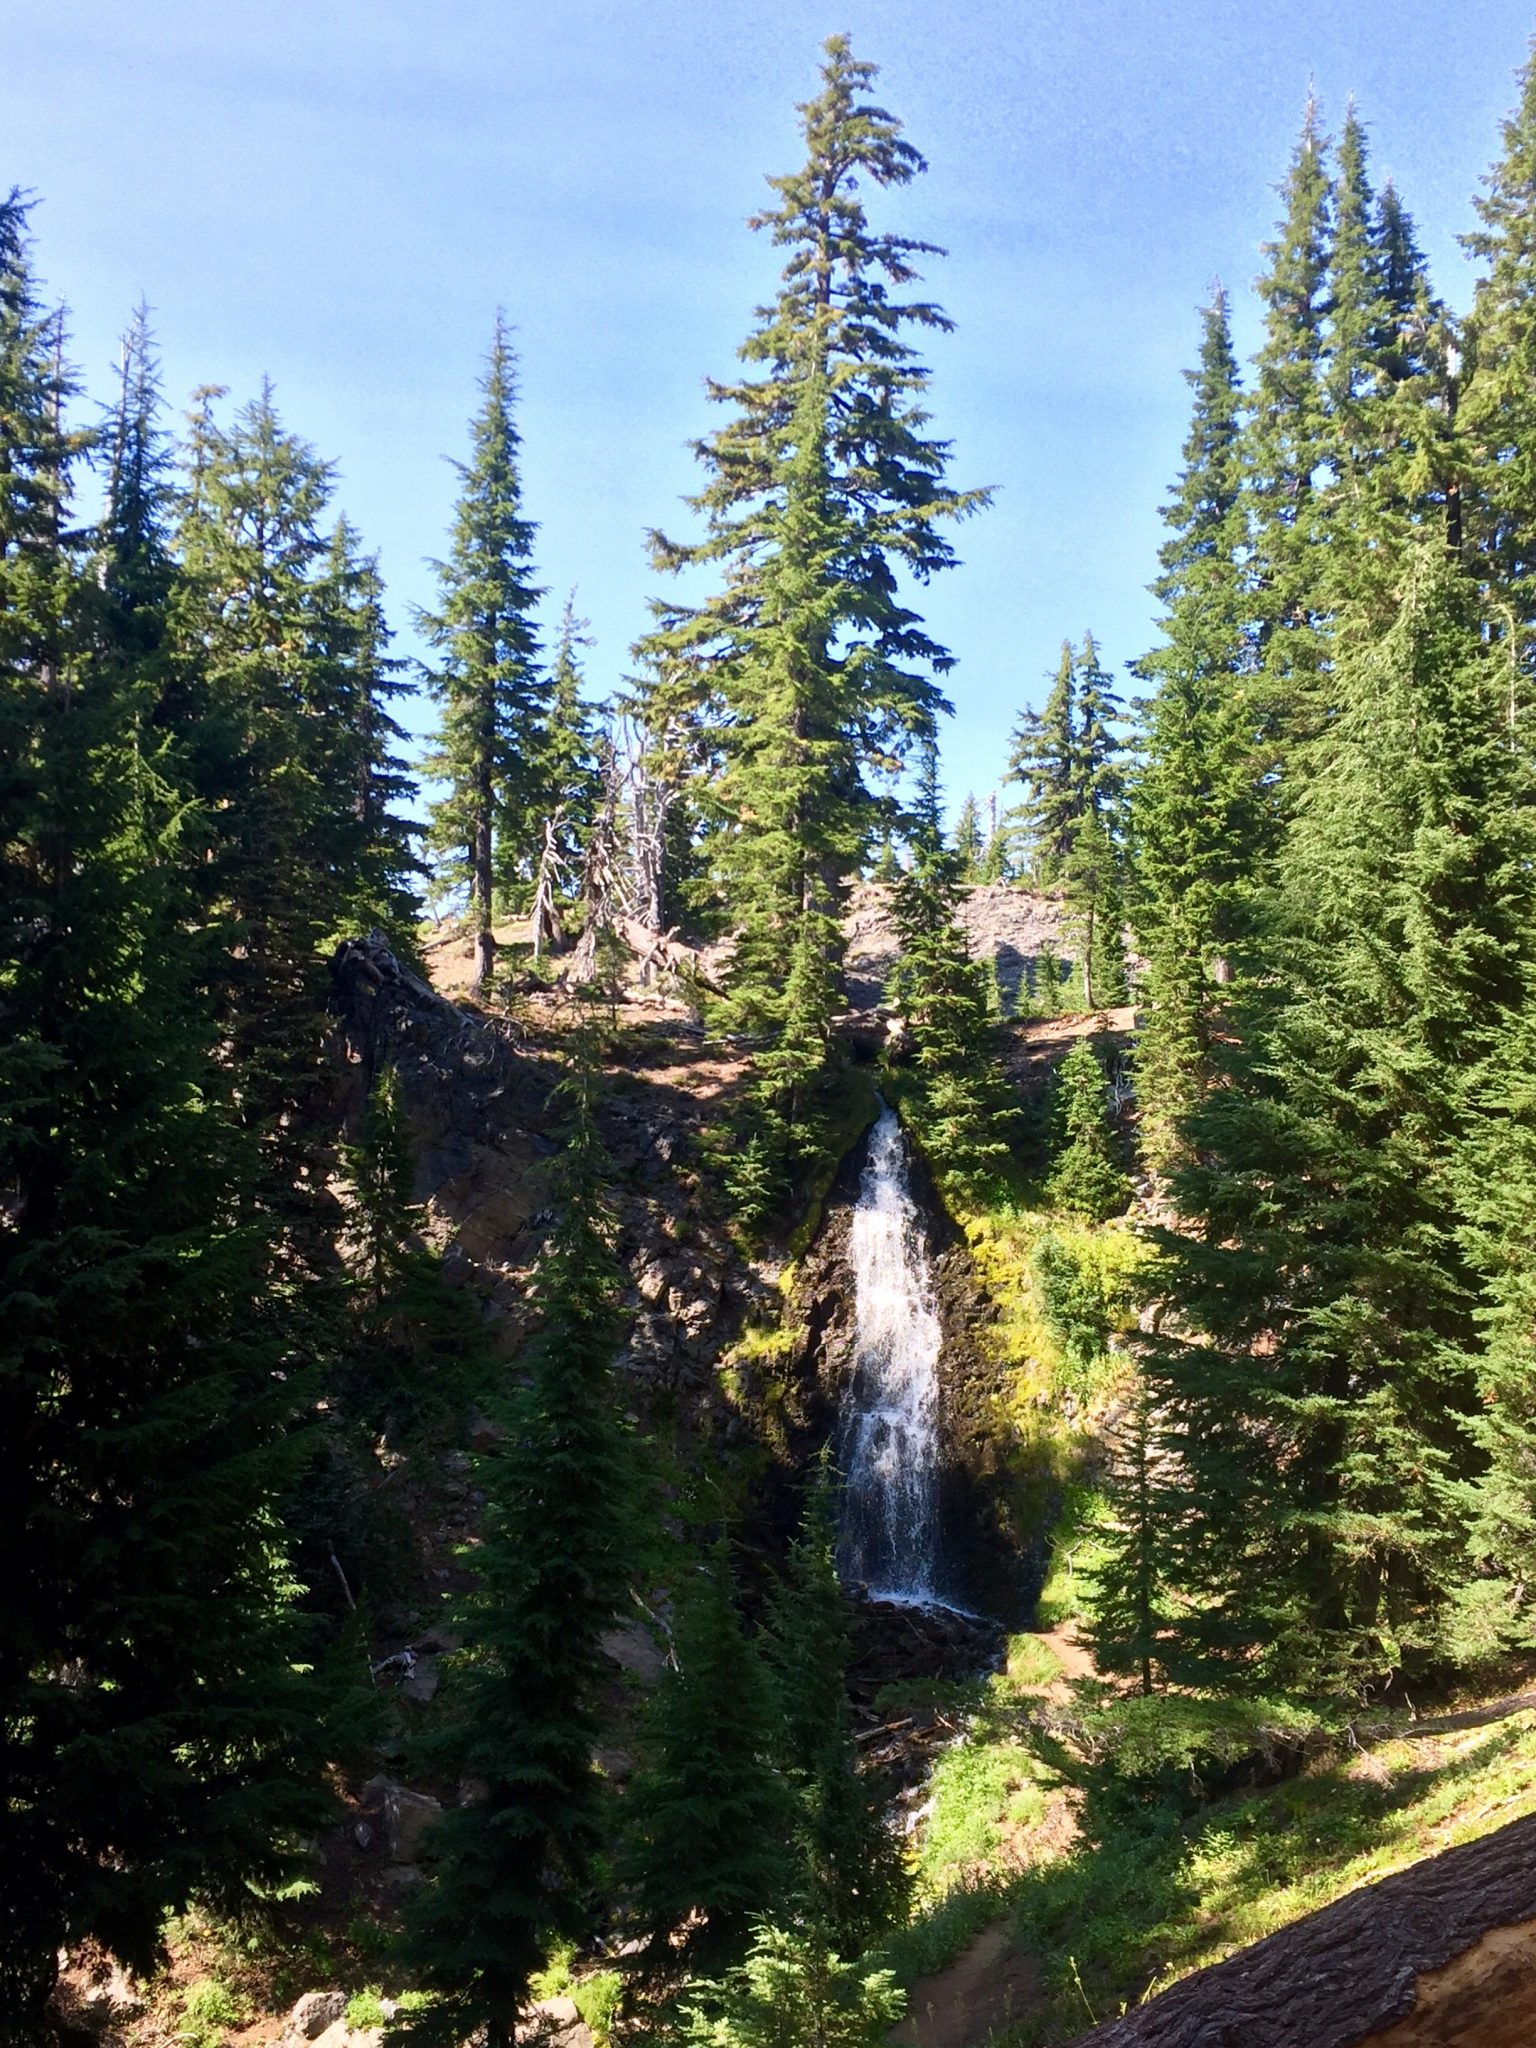 Obsidian Falls from an overlook on the PCT